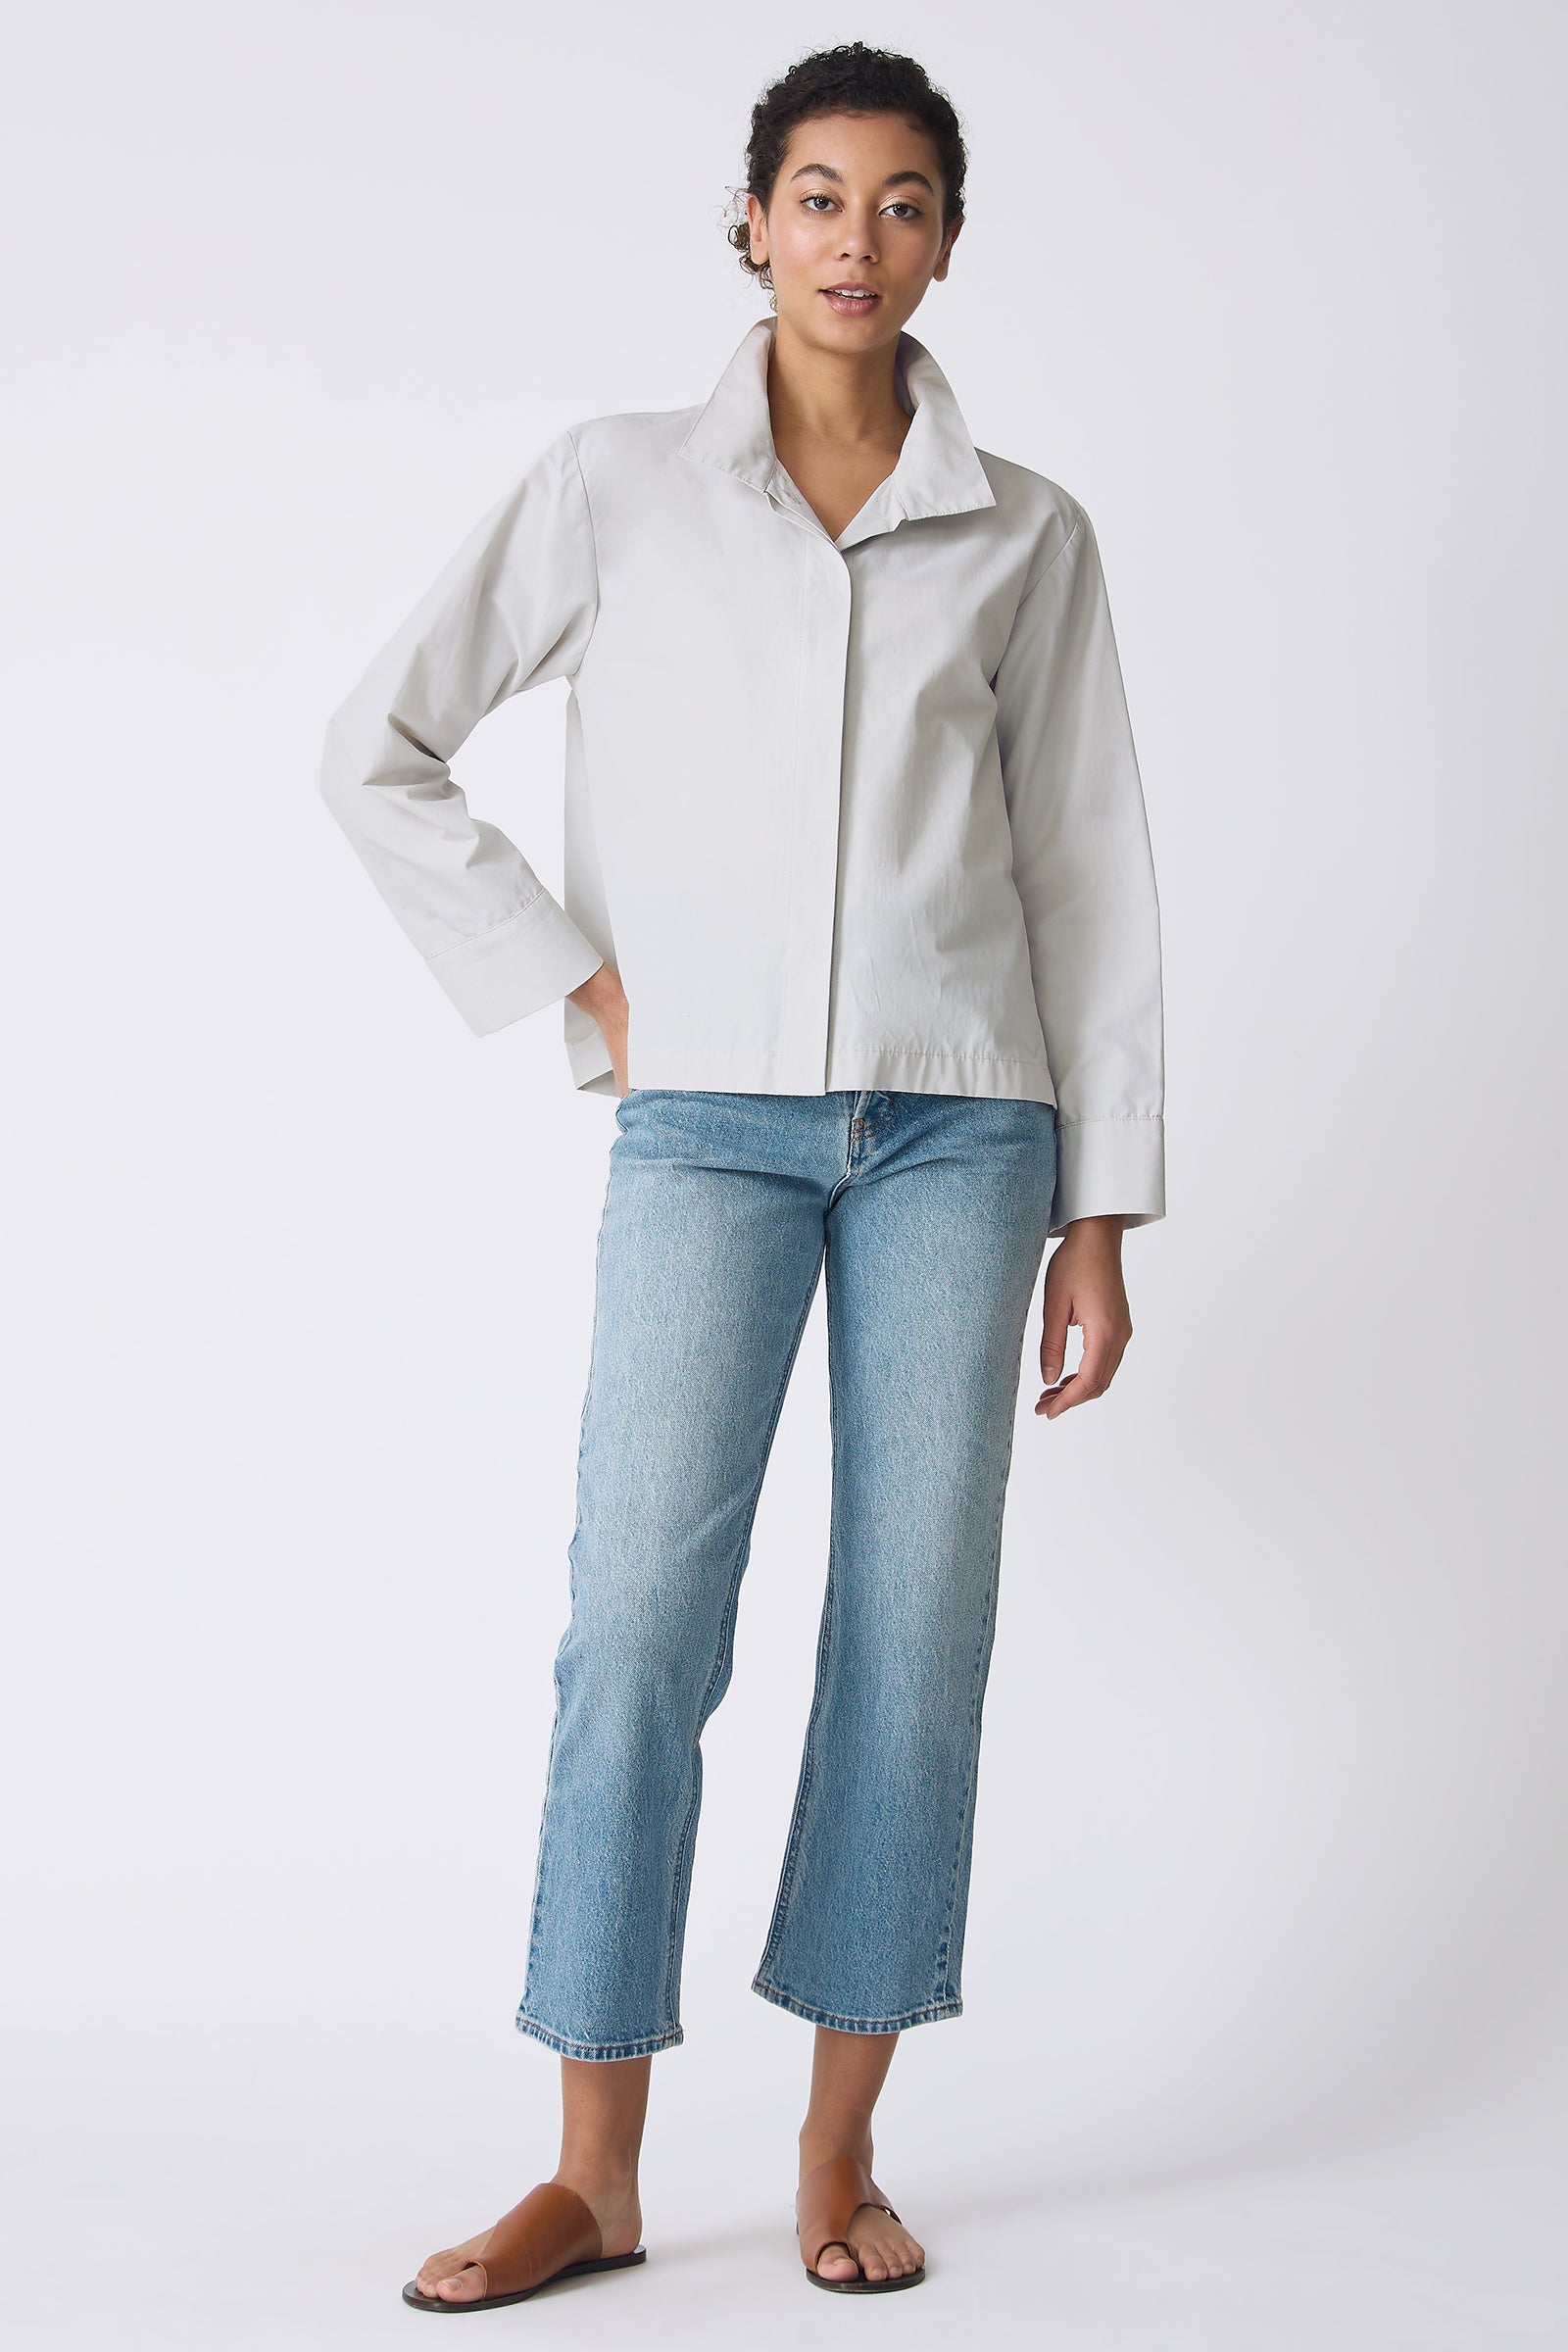 Kal Rieman Peggy Collared Shirt in Stone on model with hand on hip full front view